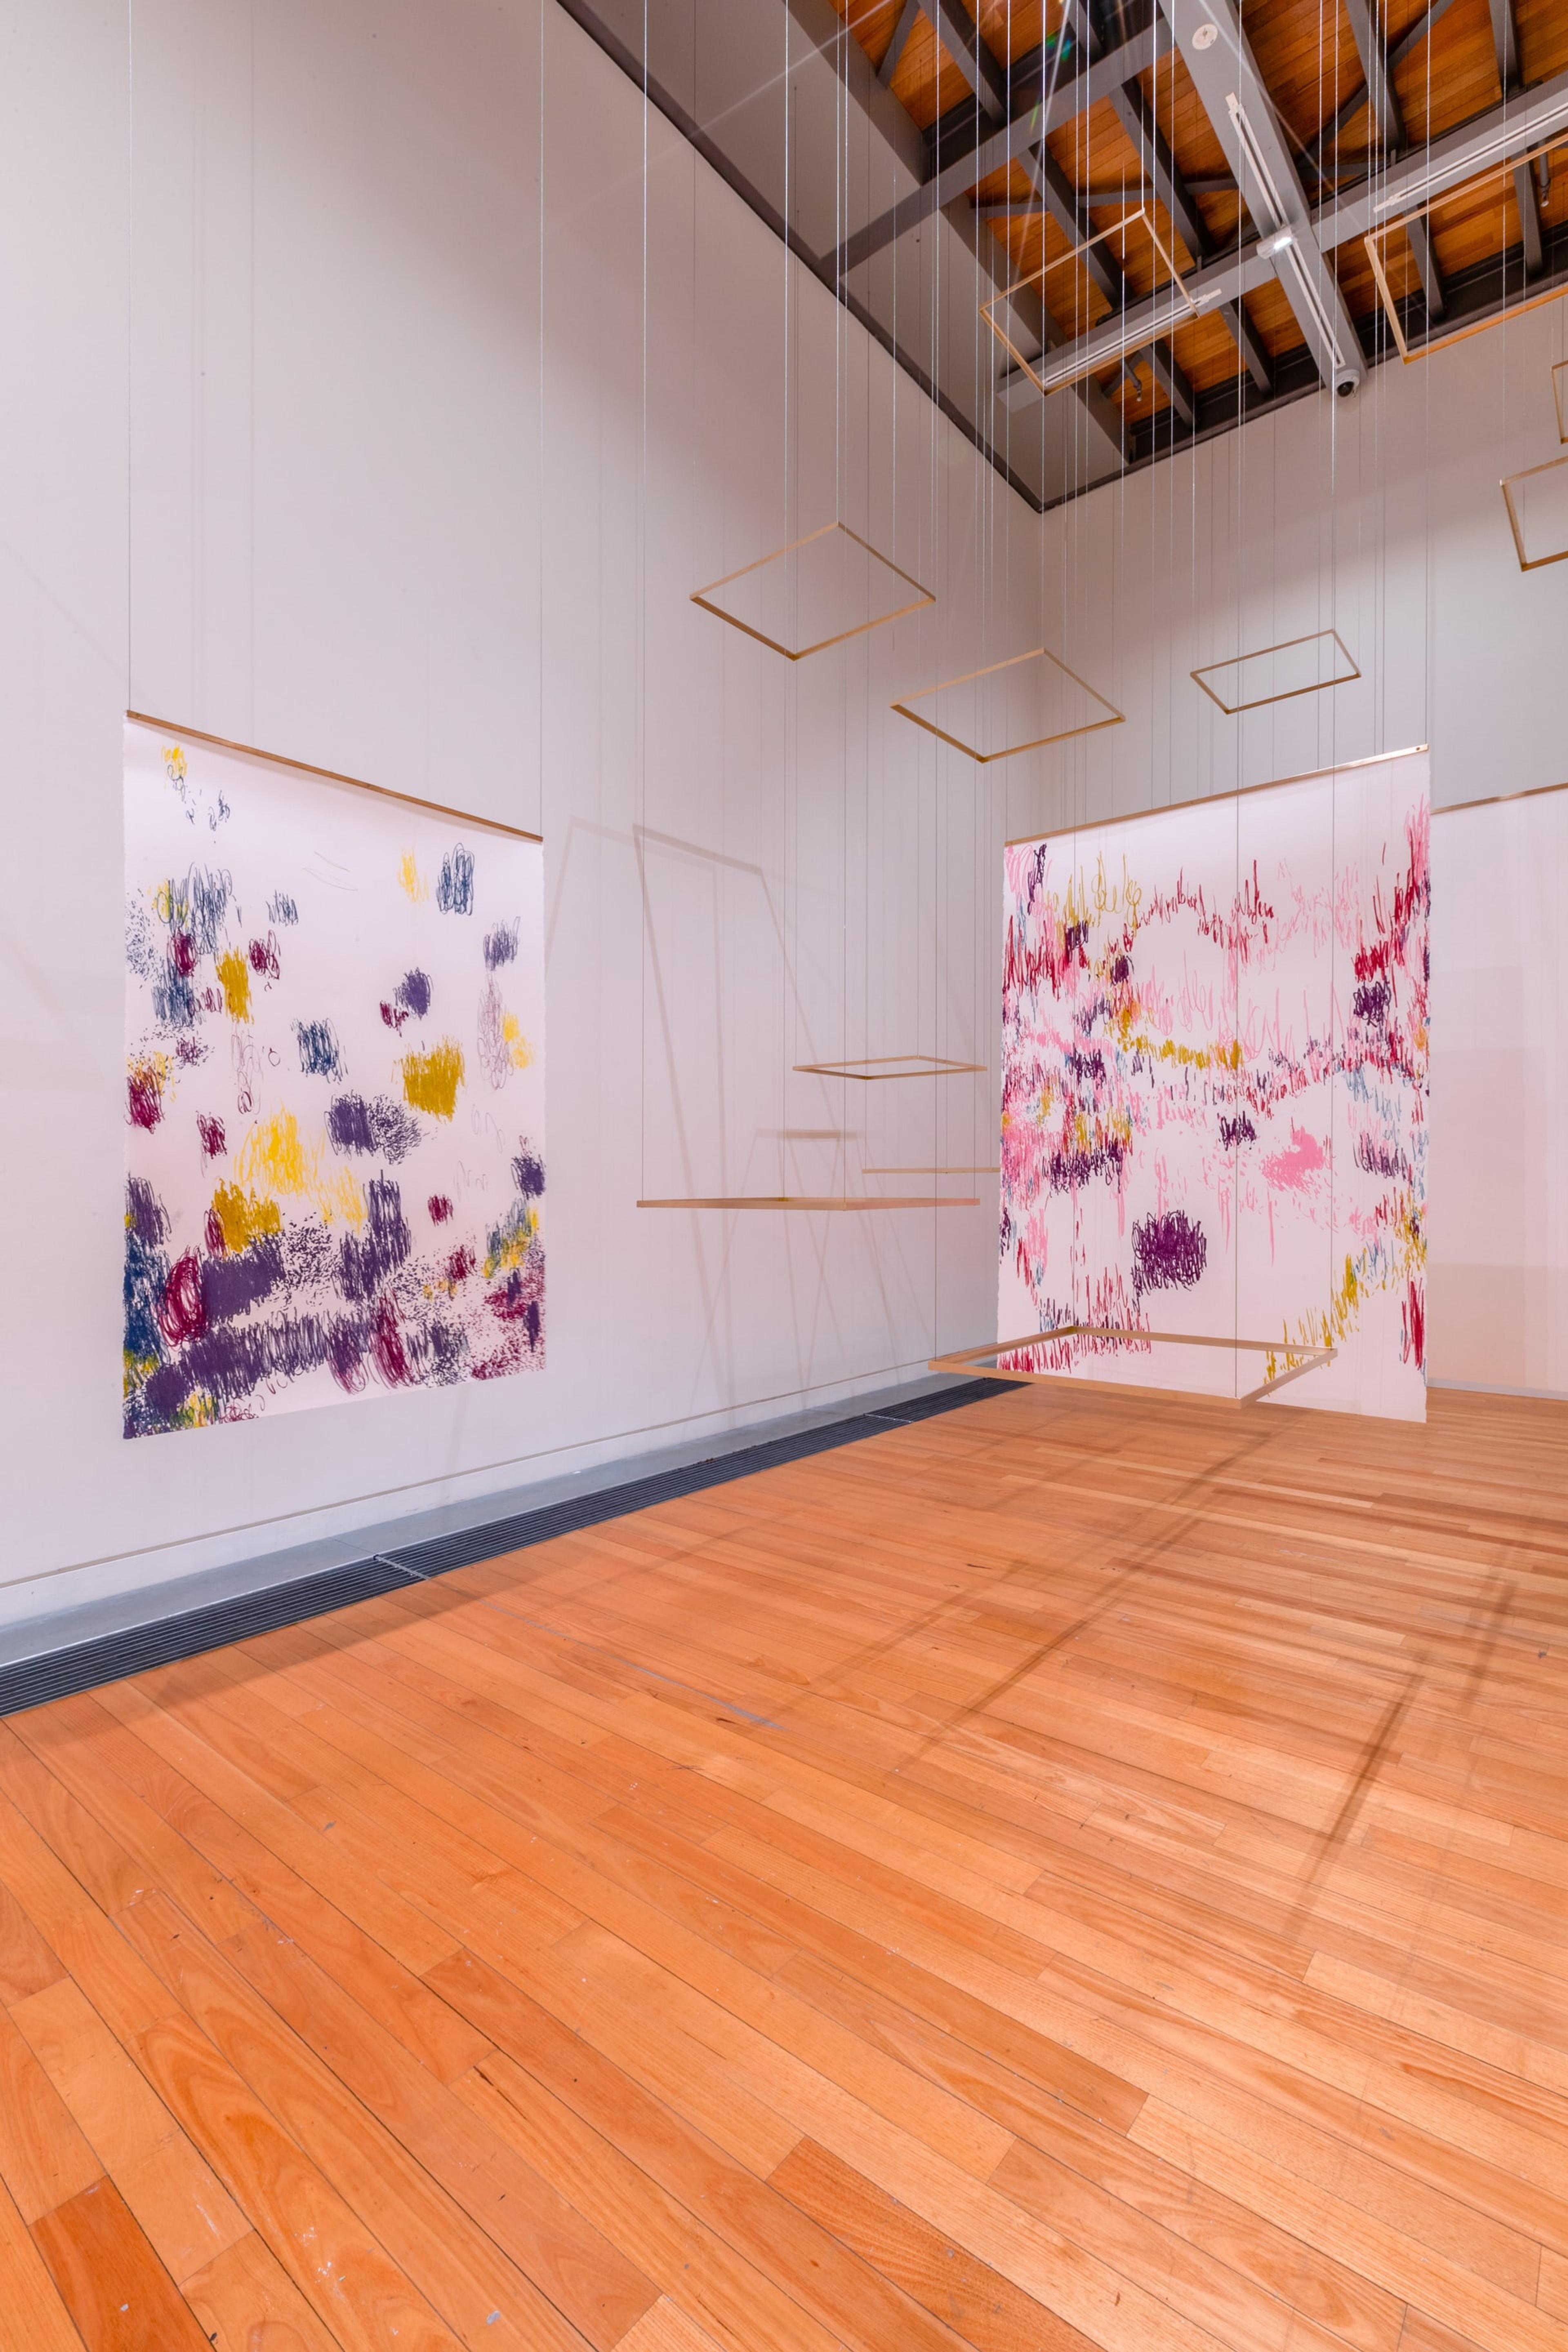 Installation view, Pieces on Earth (2020) in Energy Work: Kathy Barry/Sarah Smuts Kennedy, Te Pātaka Toi Adam Art Gallery, Victoria University of Wellington. Photo: Ted Whitaker